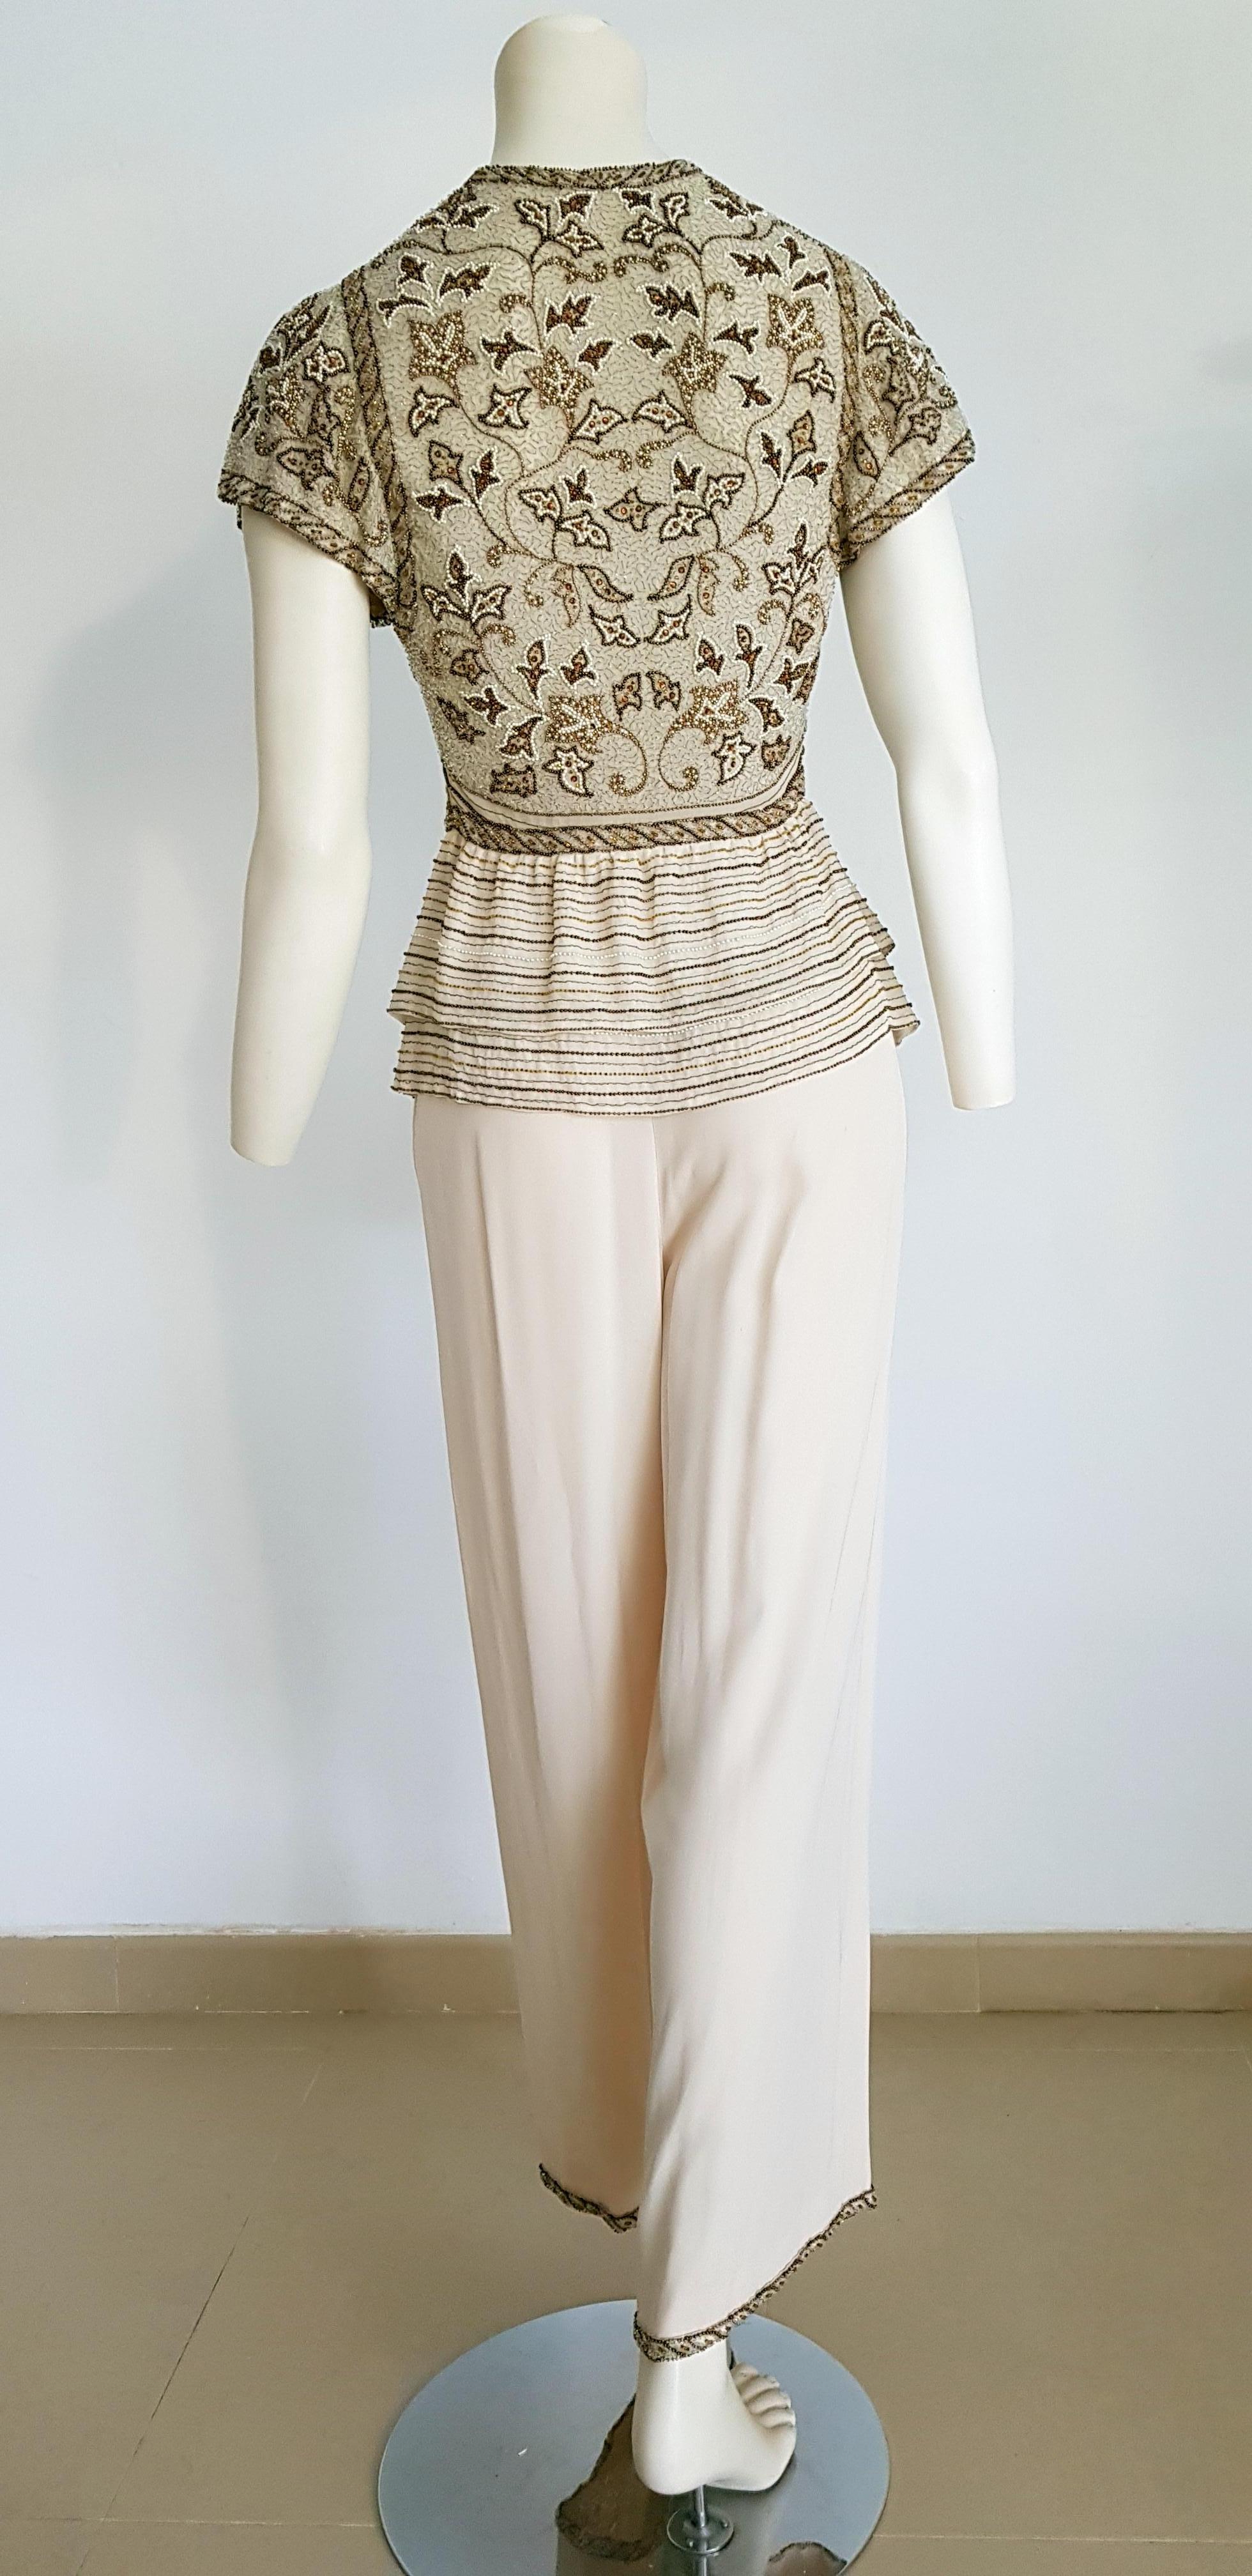 VALENTINO Haute Couture top and pants, silk and organza crepe, embroidered swarovski beaded beige dress - Unworn New

SIZE: equivalent to about Small / Medium, please review approx measurements as follows in cm. 
TOP: lenght 60, chest underarm to